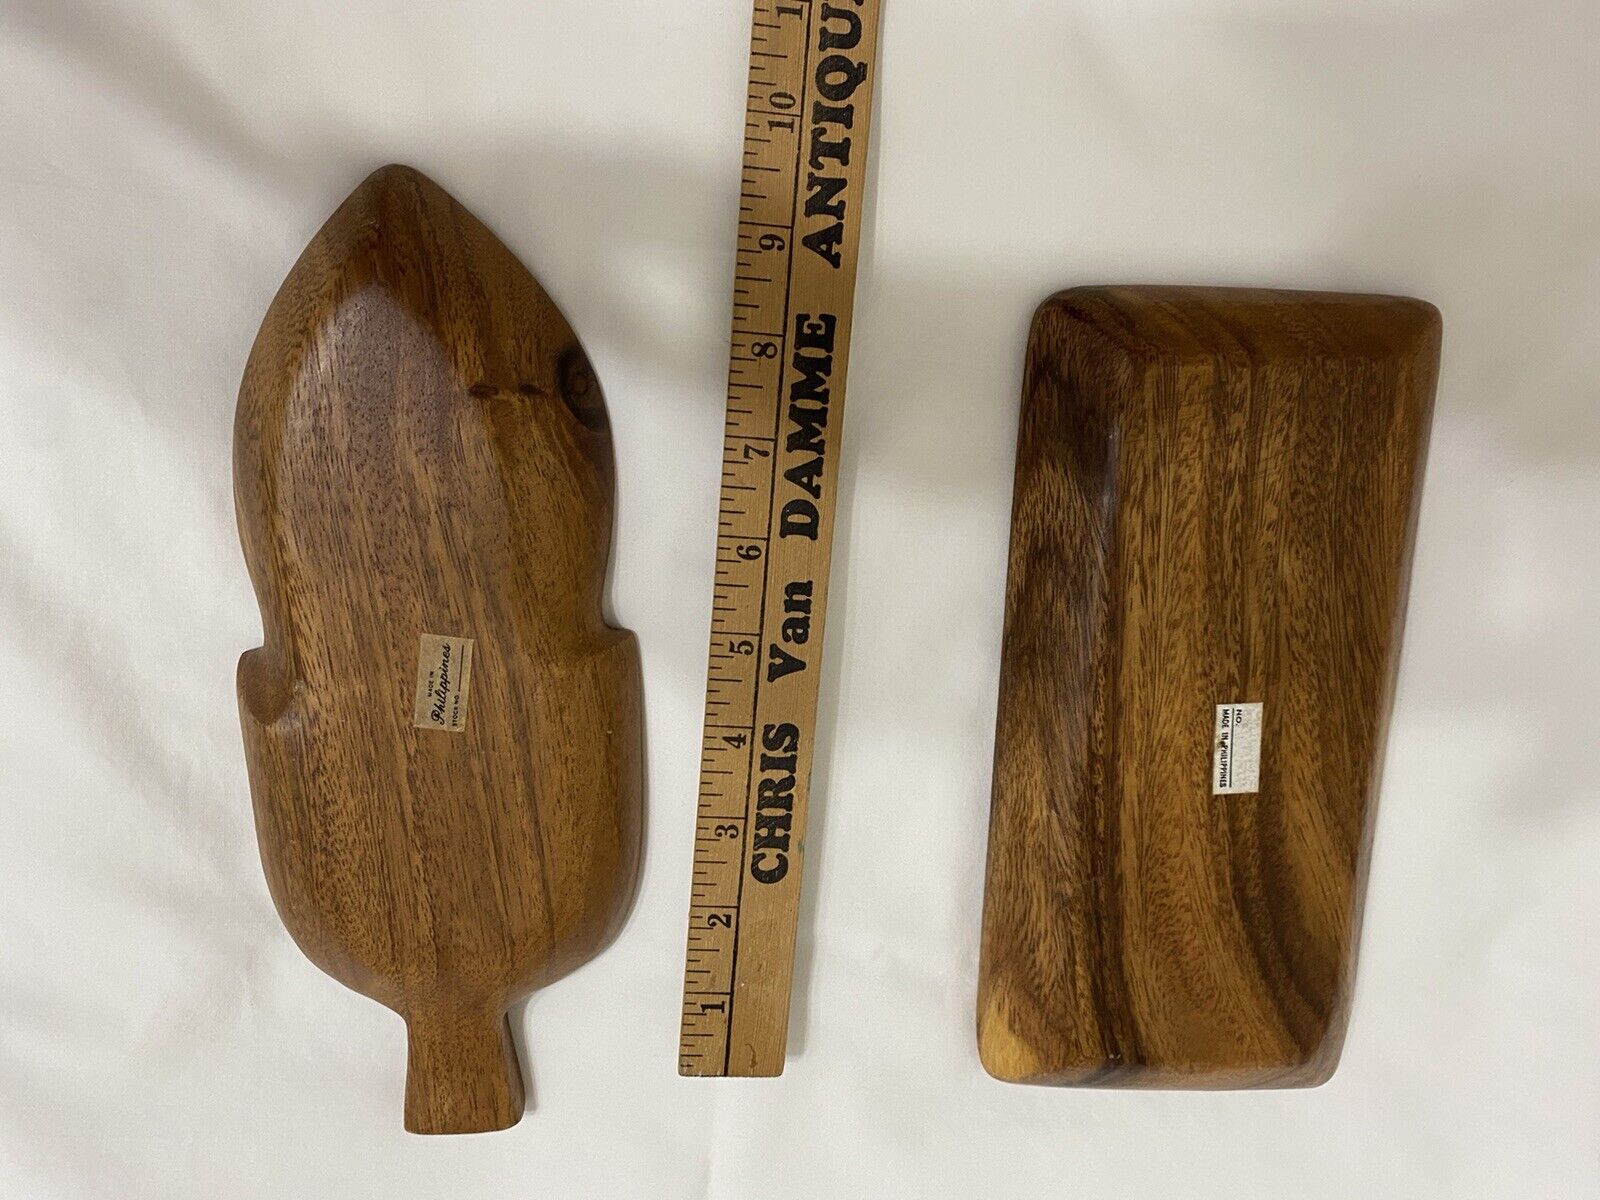 Lot 2 Mid Century MCM Vintage Philippines Monkey Pod Wood Serving Trays Divided